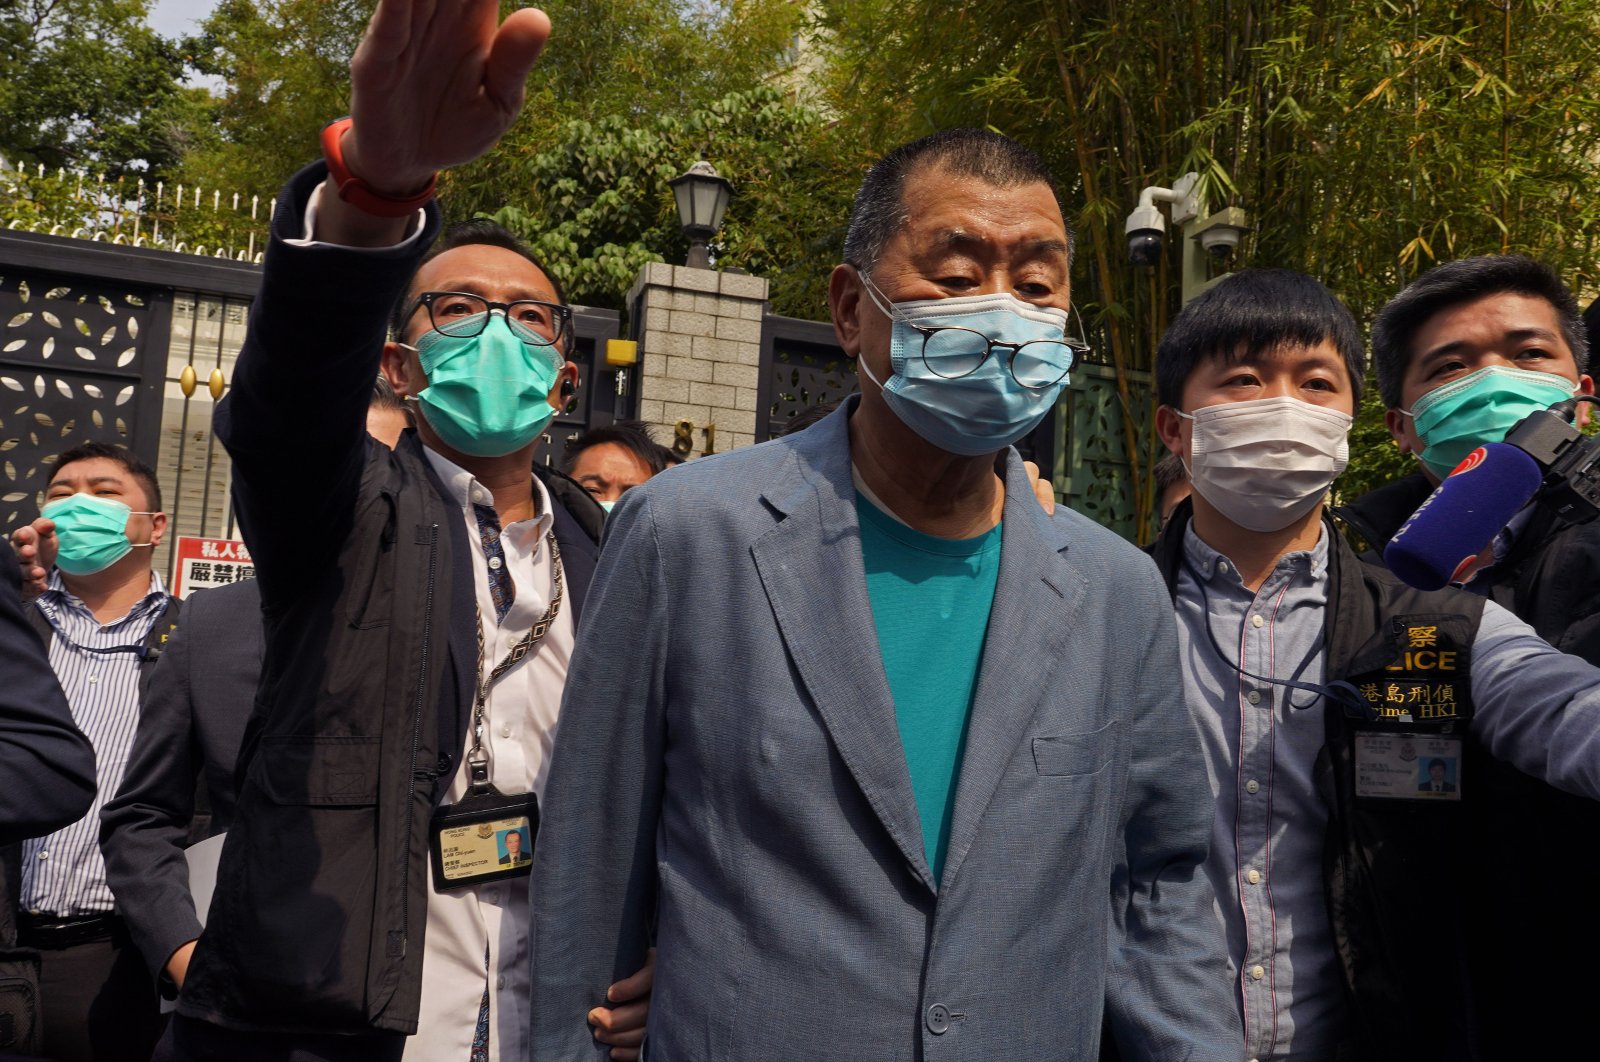 Hong Kong media tycoon Jimmy Lai, center, who founded local newspaper Apple Daily, is arrested by police officers at his home in Hong Kong, Saturday, April 18, 2020. (AP Photo)